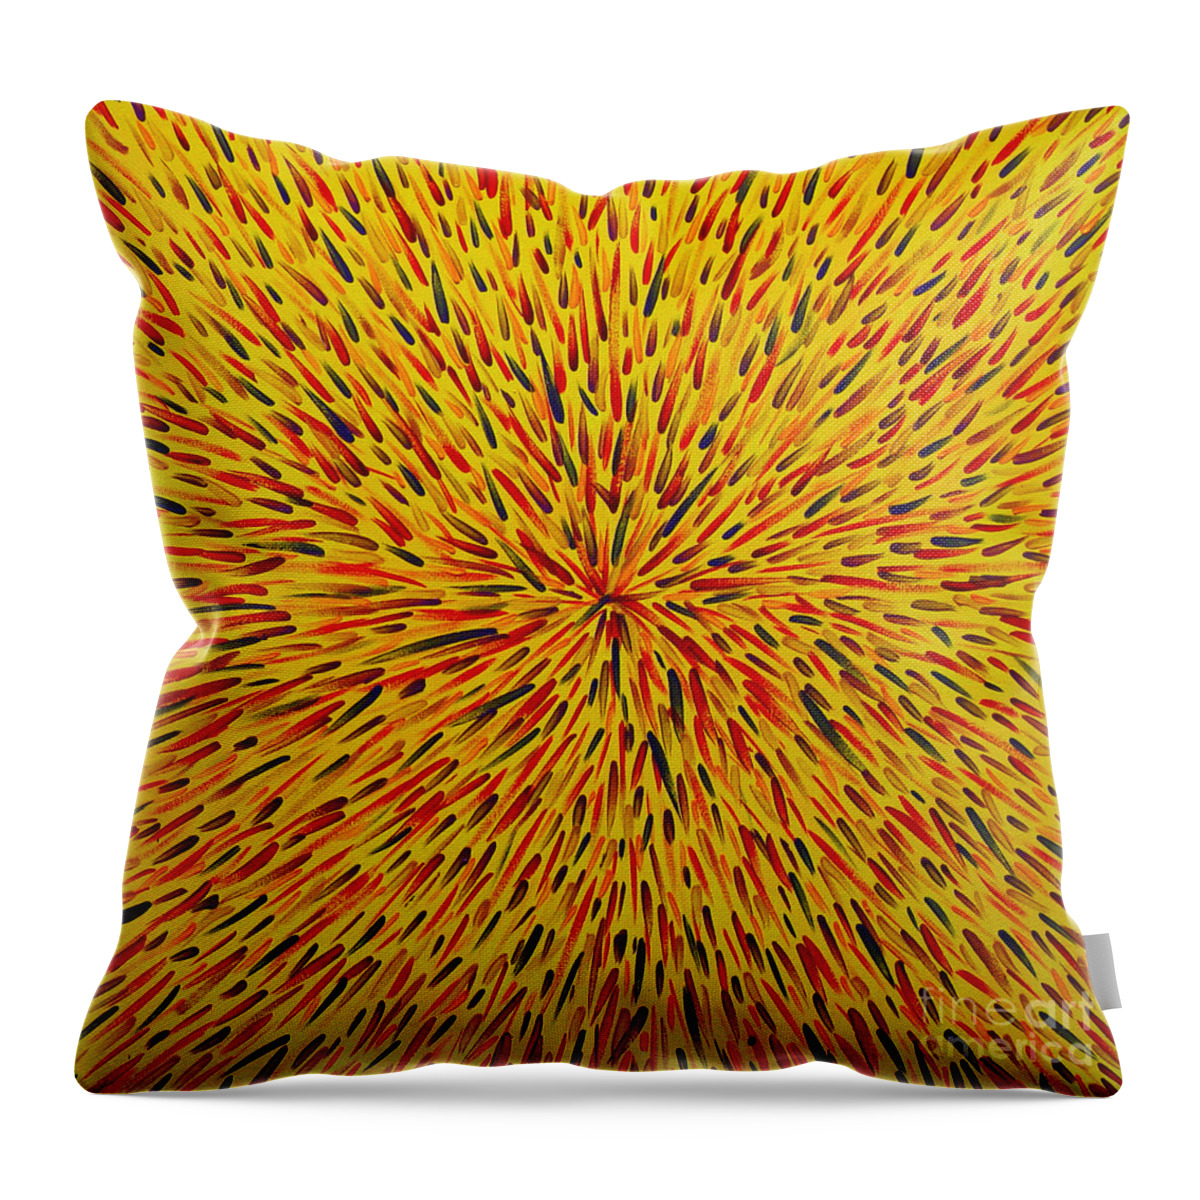 Radiation Throw Pillow featuring the painting Radiation Yellow by Dean Triolo